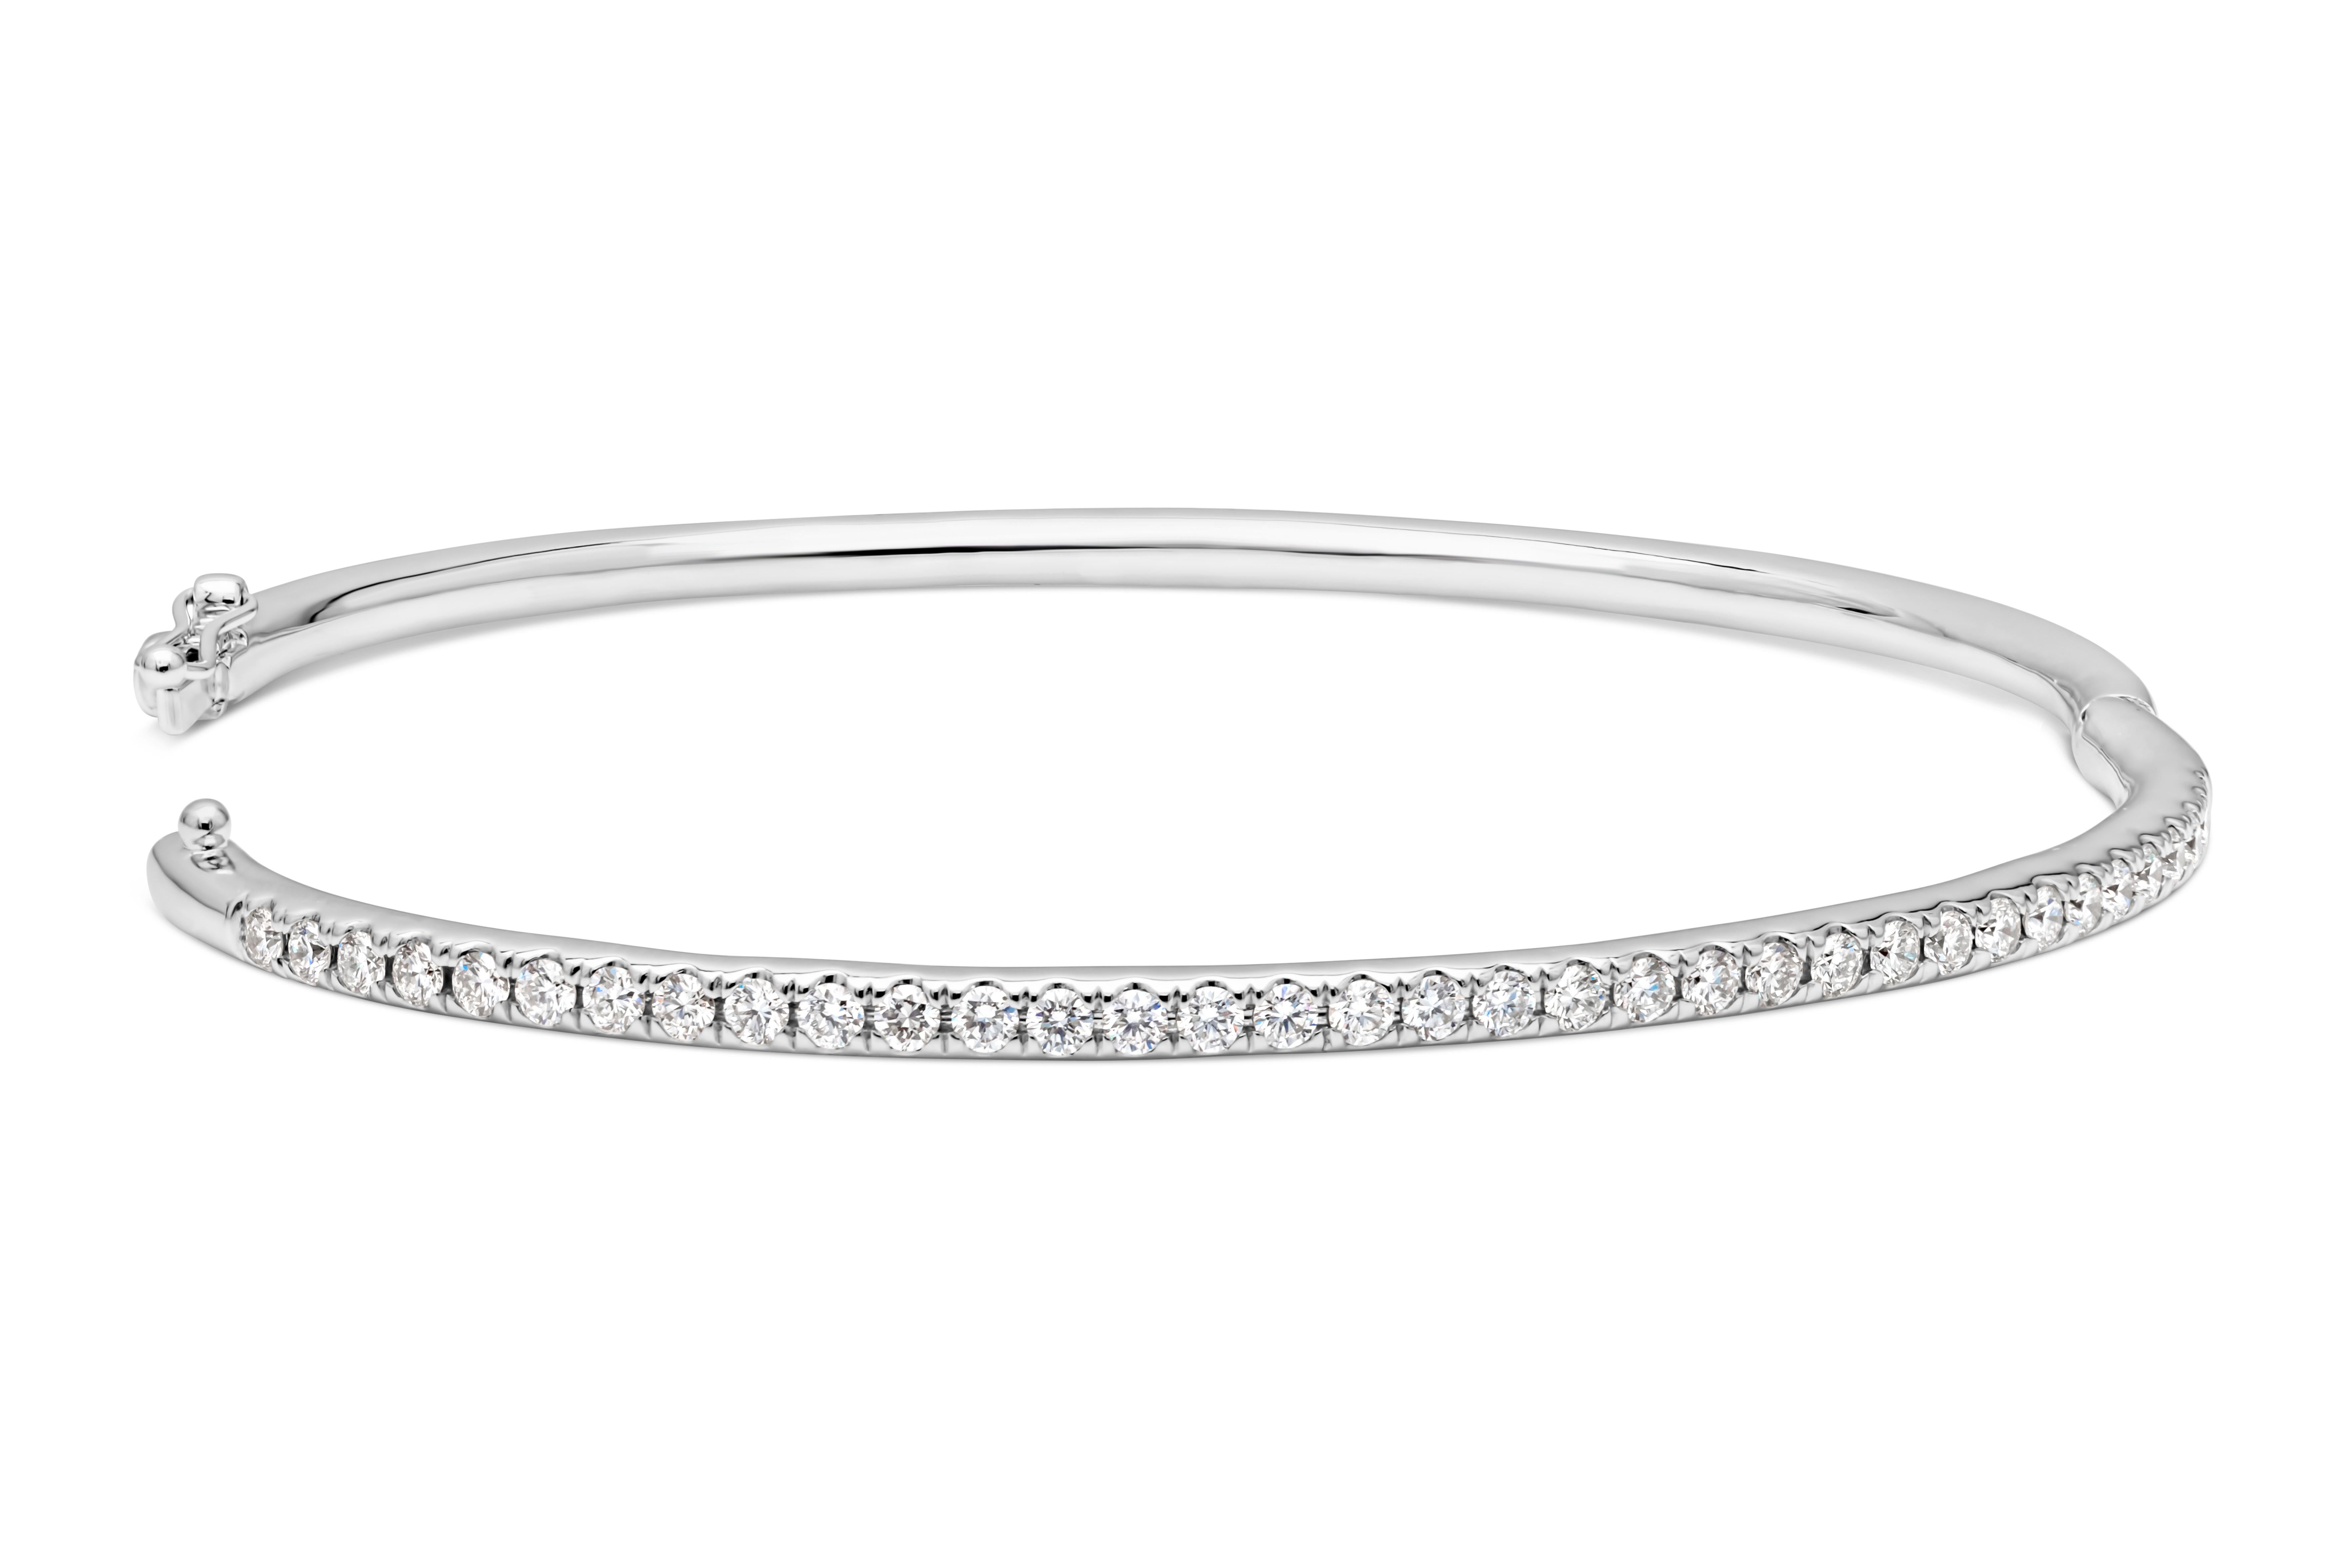 A simple and elegant large wrist bangle bracelet, featuring 35 round brilliant cut diamonds weighing 1.10 carats total with F color and VS clarity. Finely set on 14K white gold, with a clasp for secure wear. This bracelet is 7.57 inches in